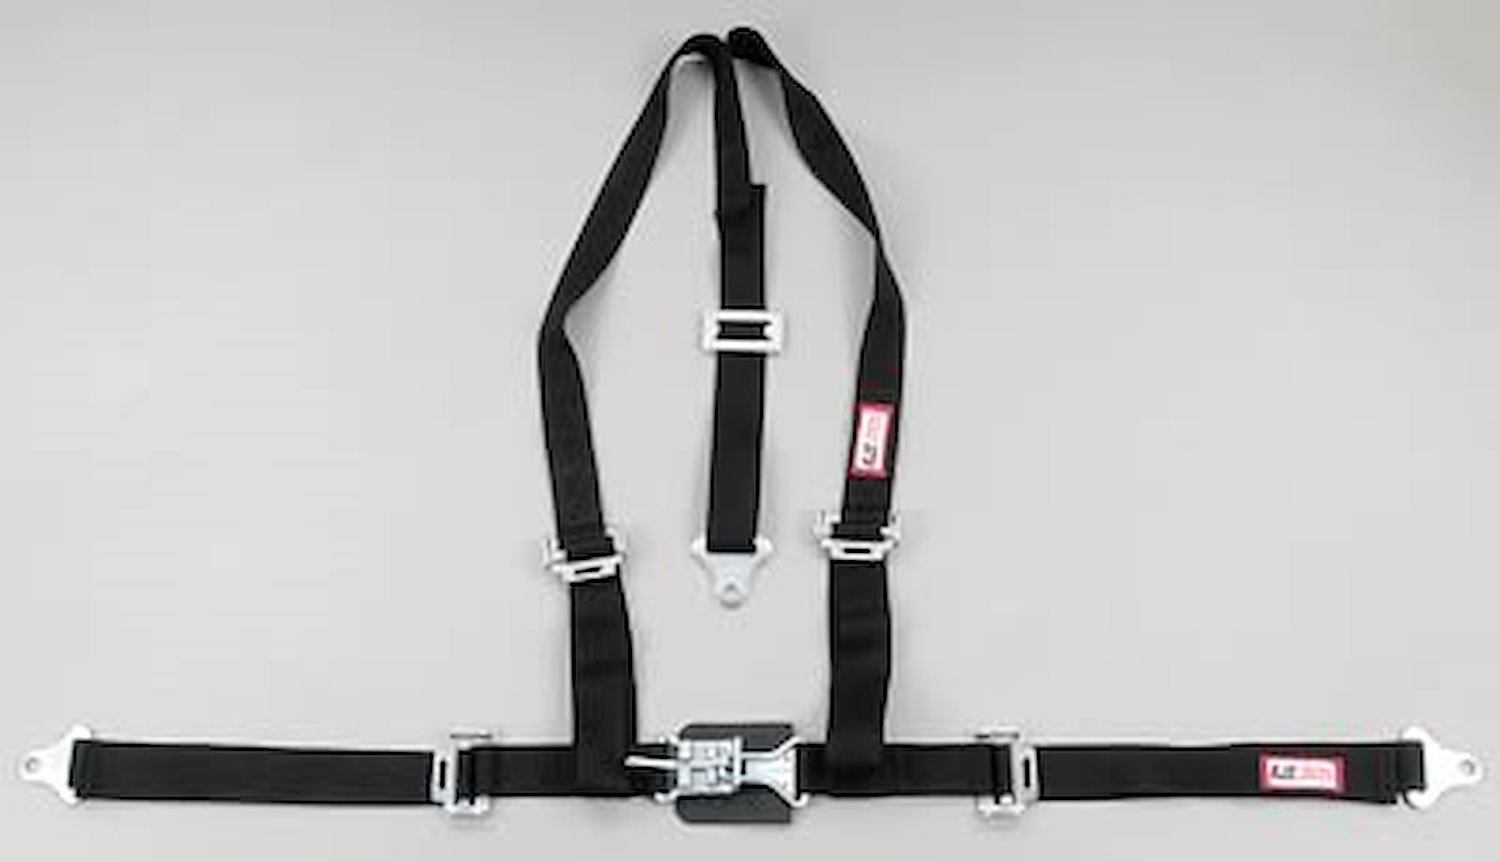 NON-SFI L&L HARNESS 3 PULL DOWN Lap Belt SNAP SEWN IN 2 S.H. Individual ROLL BAR Mount w/STERNUM STRAP WRAP/BOLT GRAY